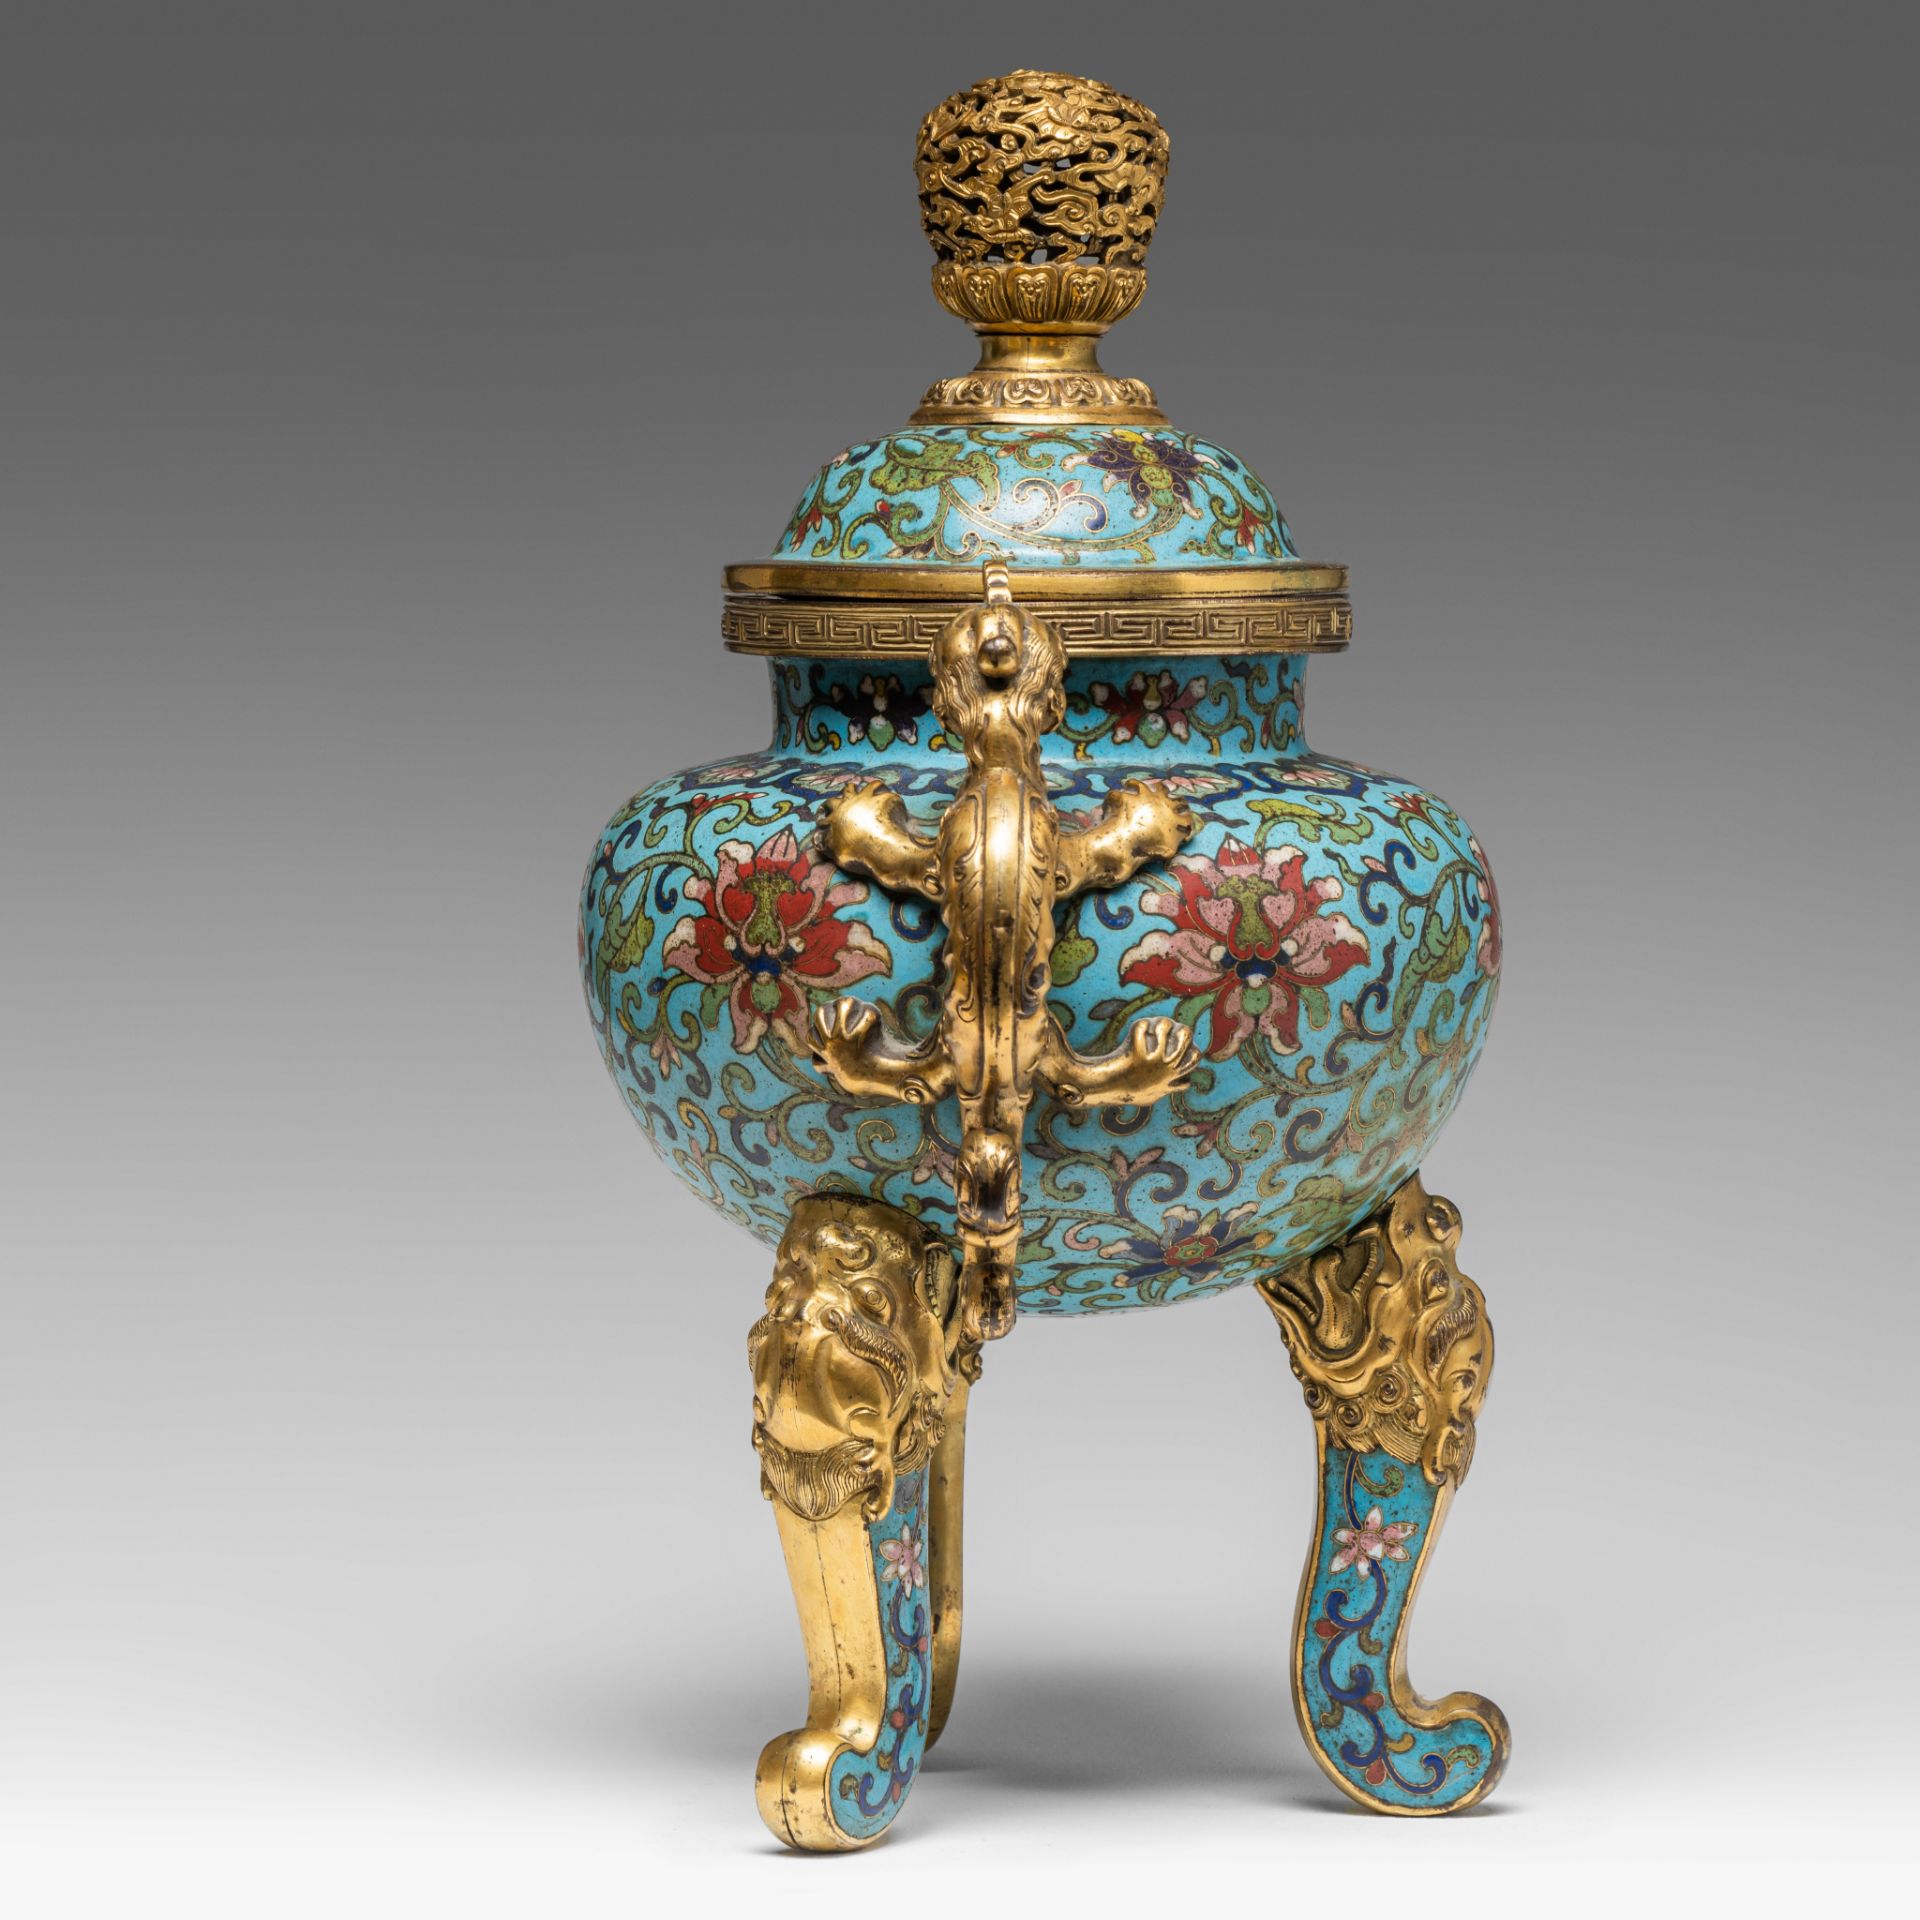 A fine Chinese cloisonne enamelled tripod censer and cover, late 18thC, H 32,8 cm - Image 4 of 8